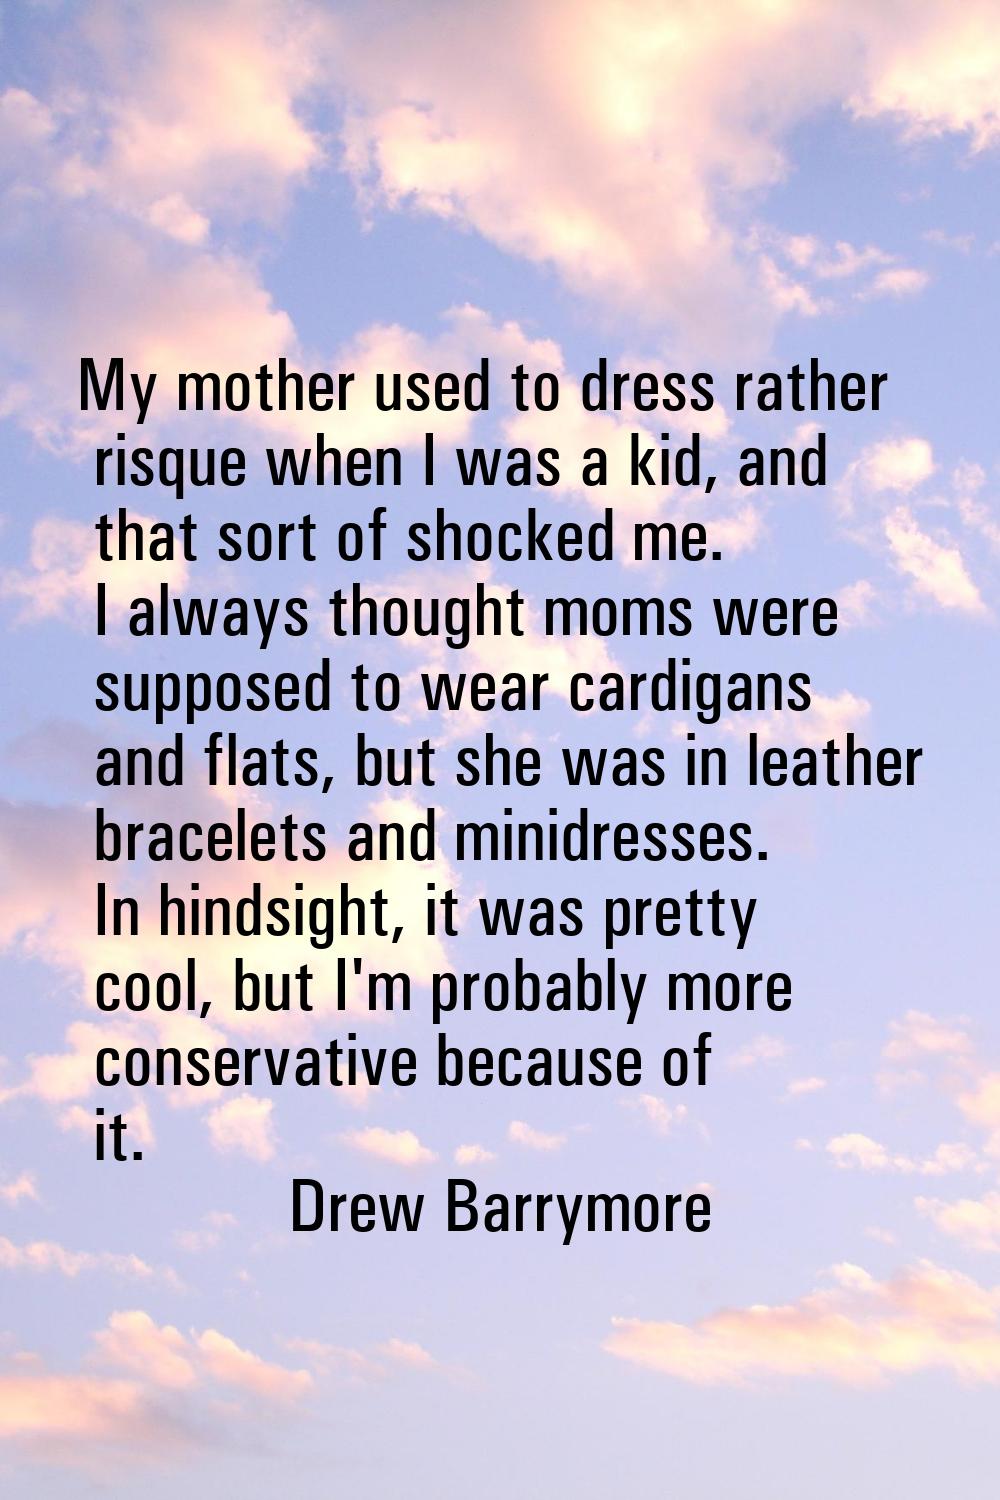 My mother used to dress rather risque when I was a kid, and that sort of shocked me. I always thoug